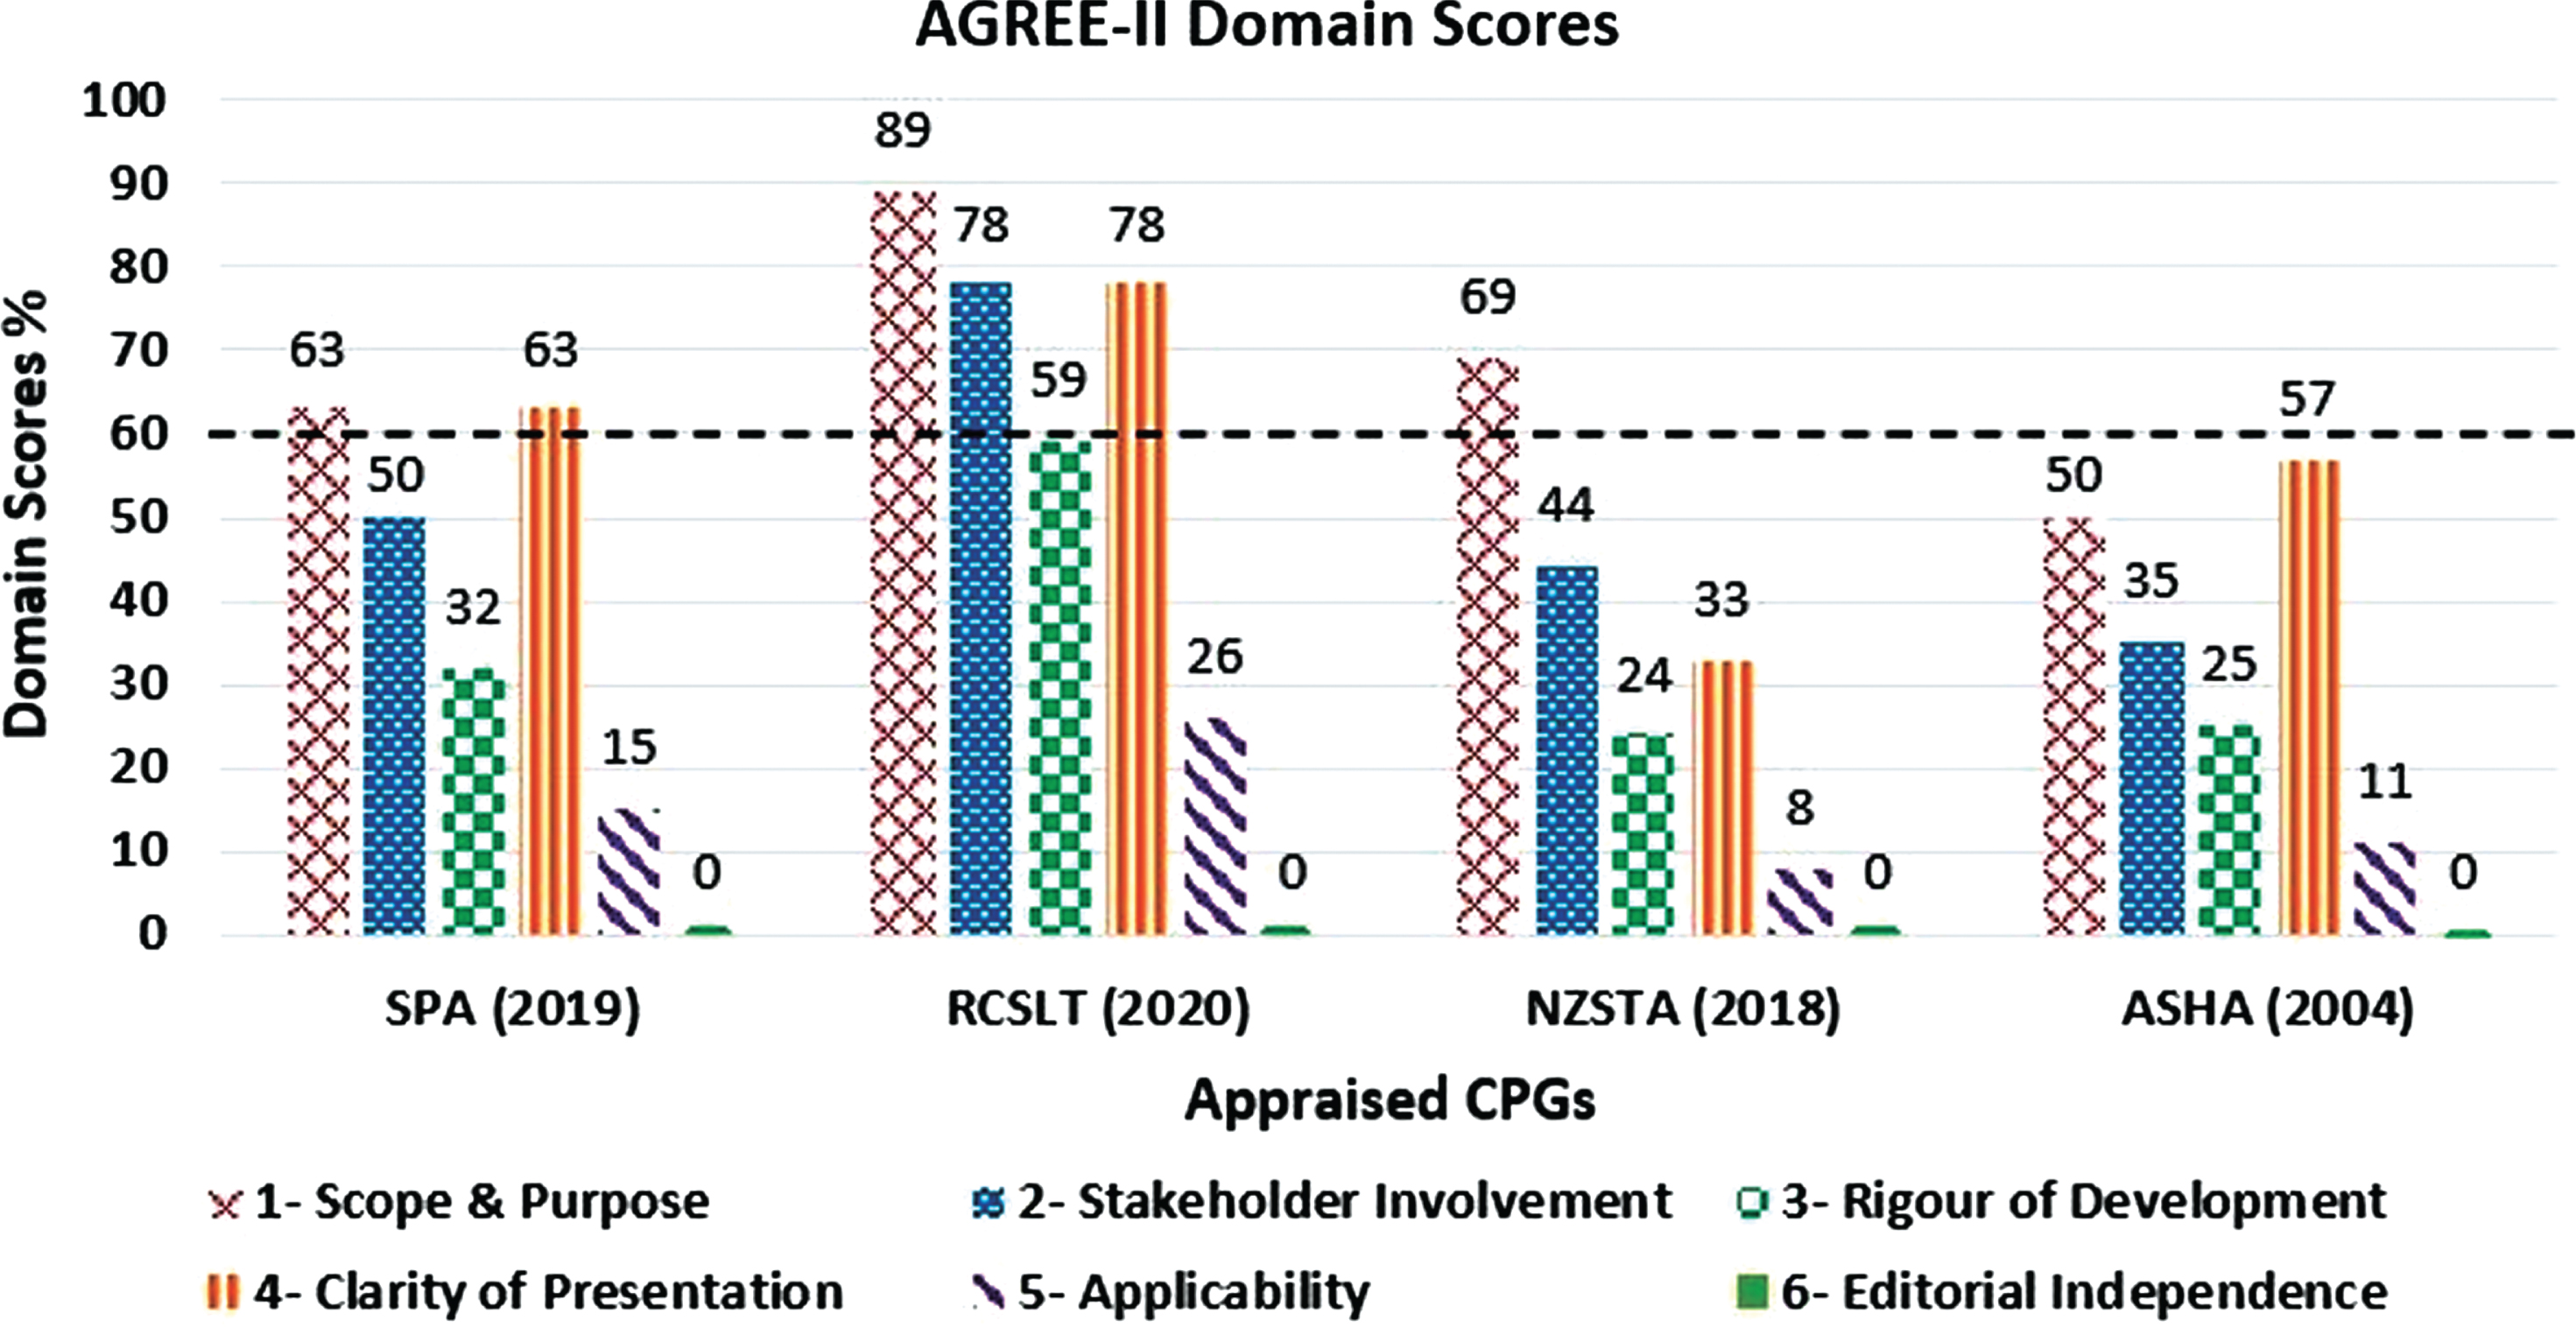 AGREE-II domain scores across the appraised clinical practice guidelines.